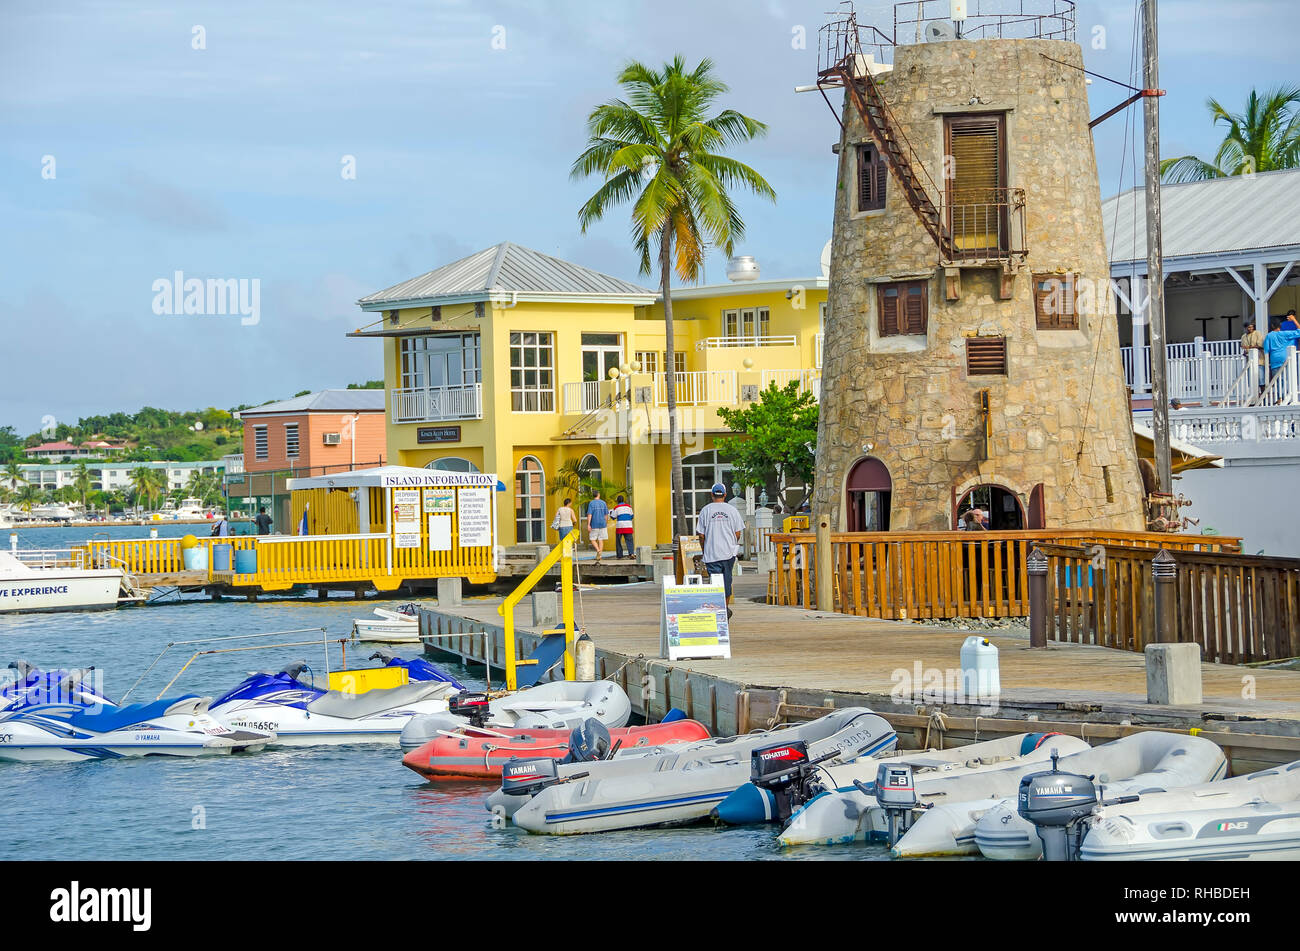 Christiansted Harbor Boardwalk with sugar mill restaurant and boats, Saint Croix,  U.S.  Virgin Islands Stock Photo